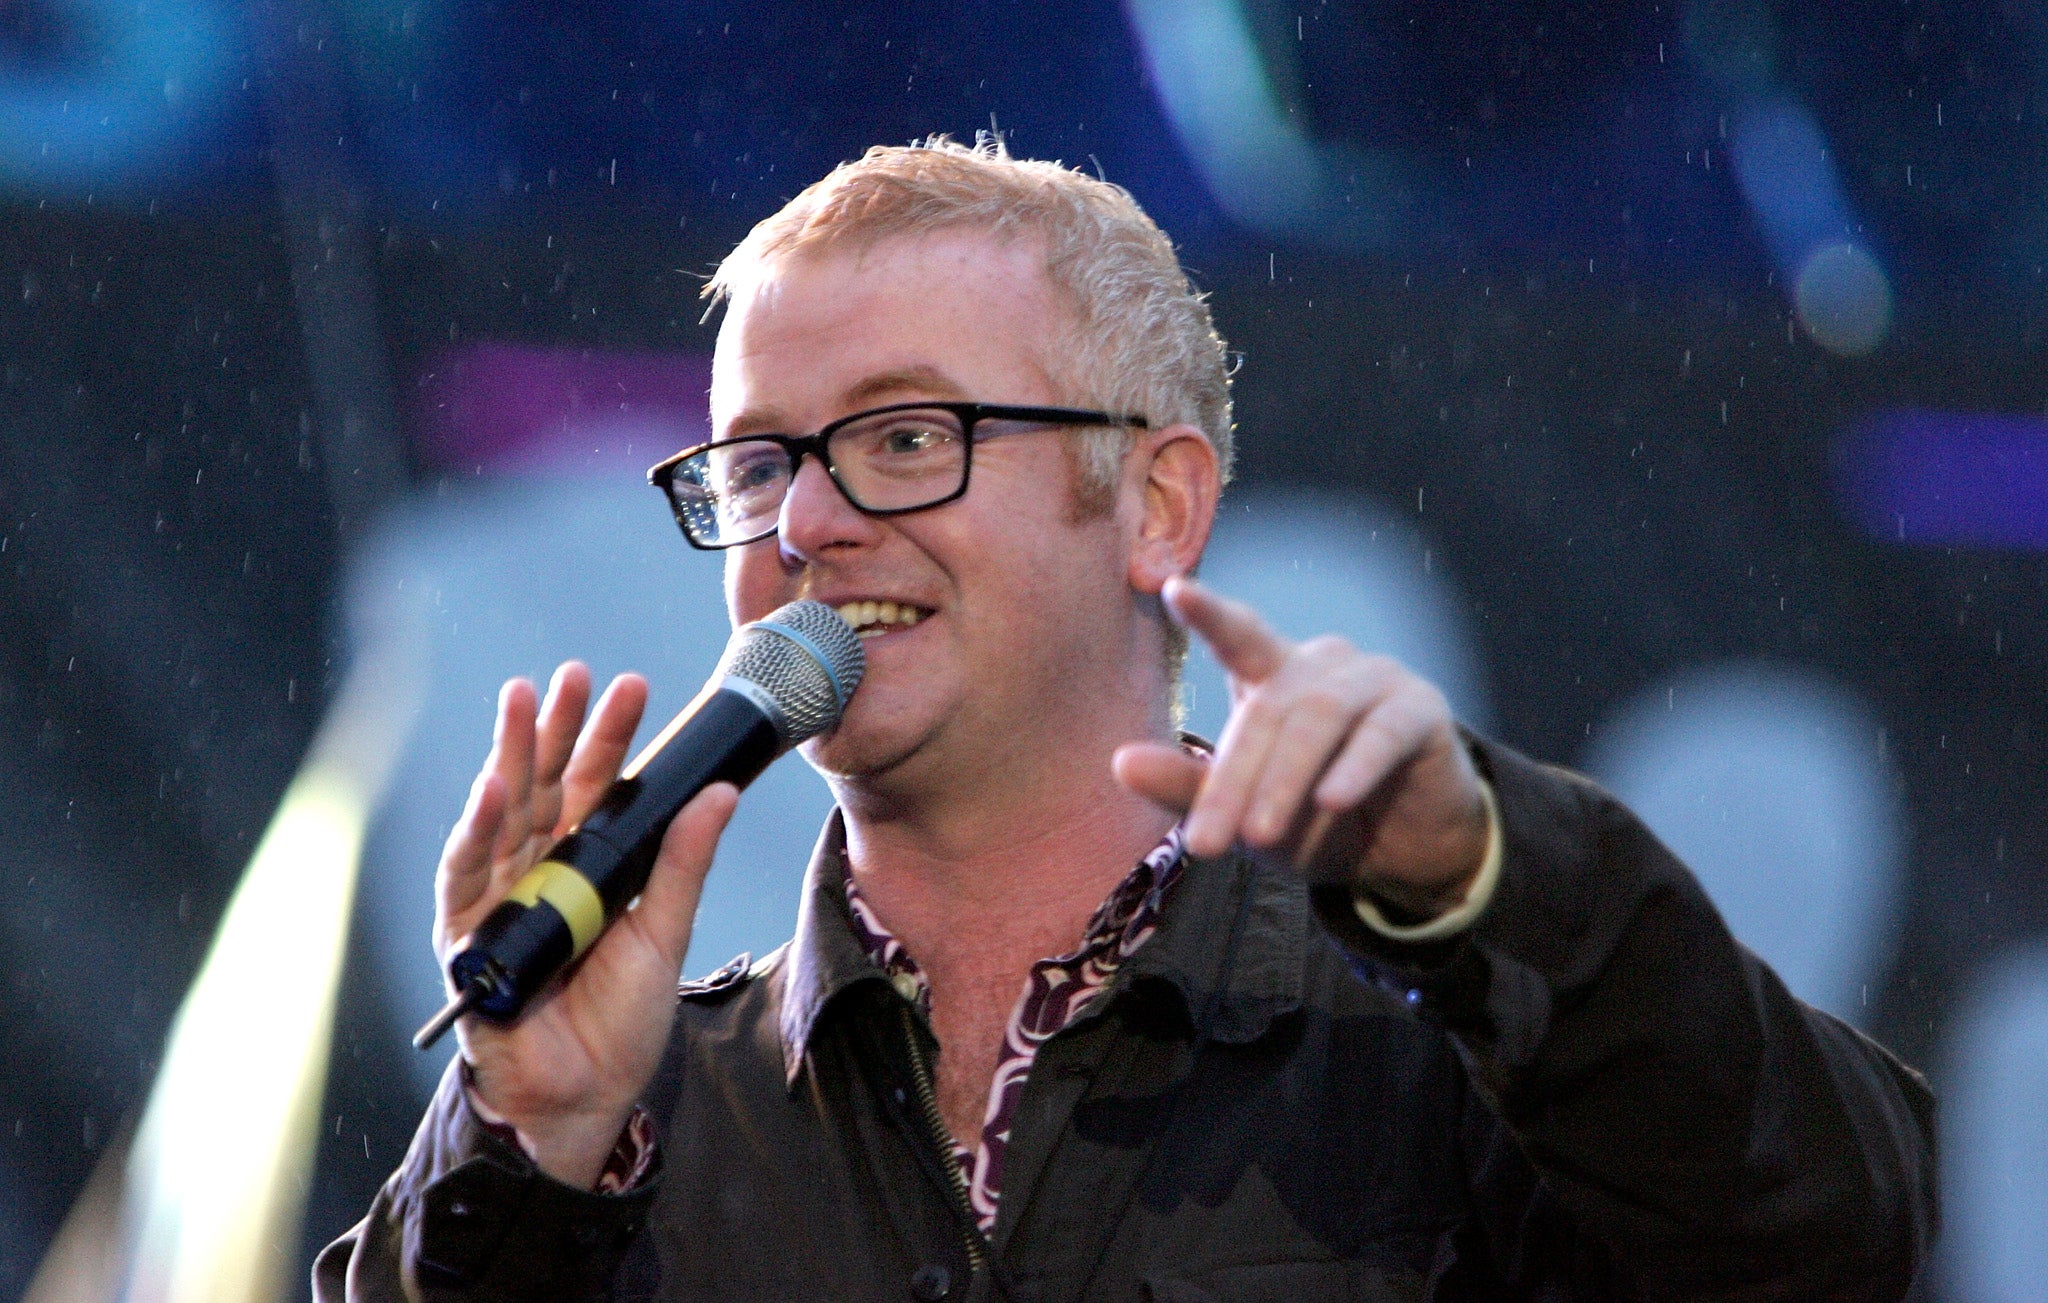 BBC presenter Chris Evans is the favourite to replace Clarkson on Top Gear should the presenter be suspended